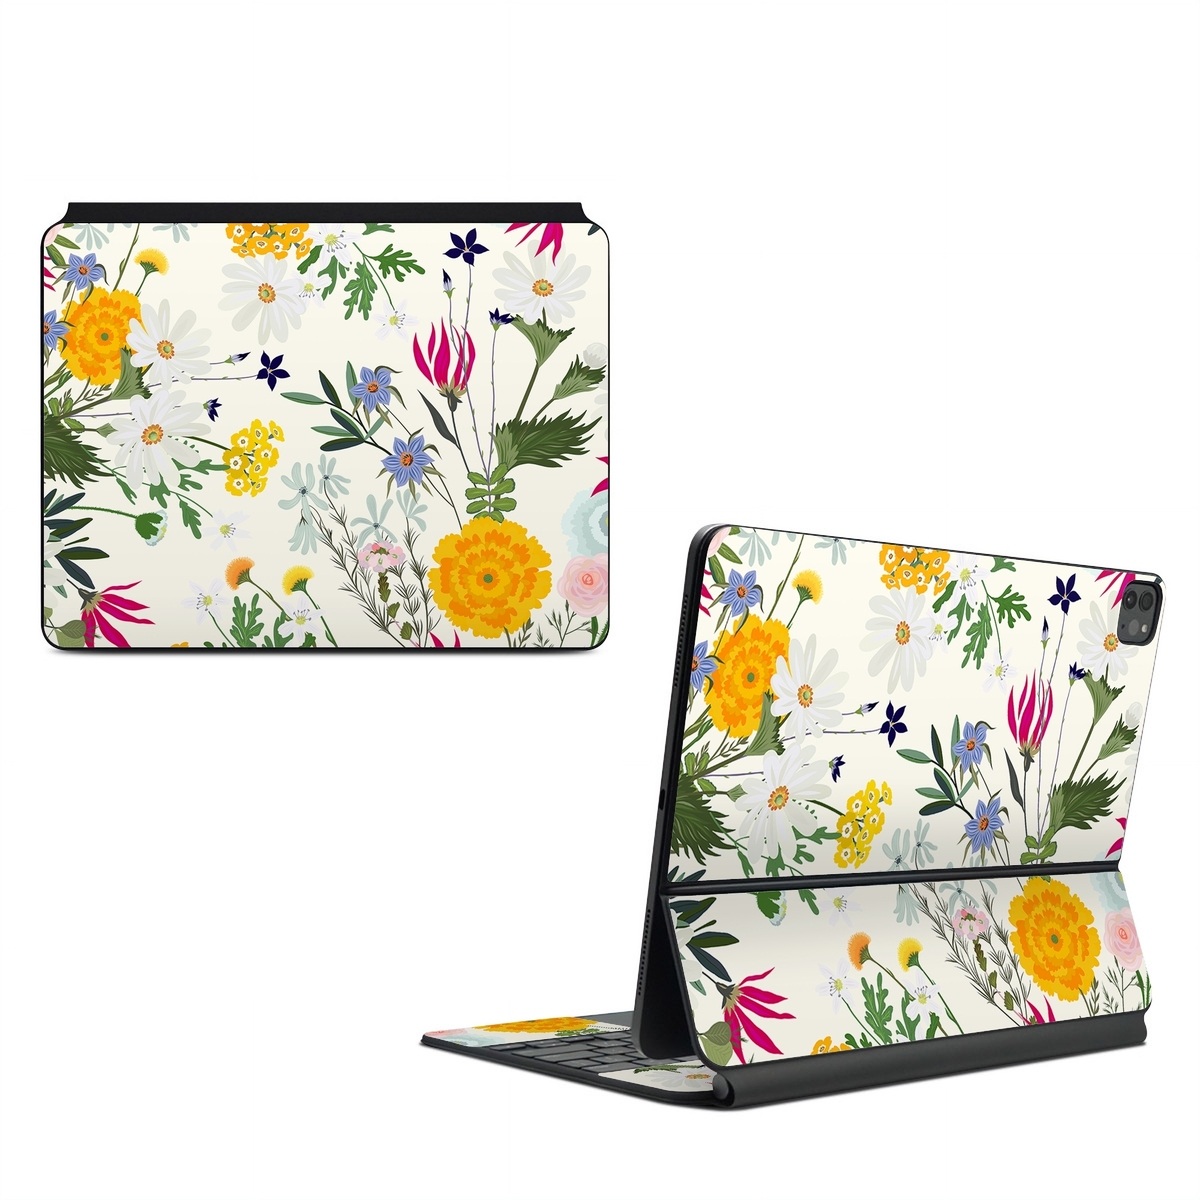 Magic Keyboard for iPad Series Skin design of Flower, Wildflower, chamomile, Floral design, Plant, camomile, Botany, Clip art, Cut flowers, Daisy, with white, green, pink, orange, yellow, red colors